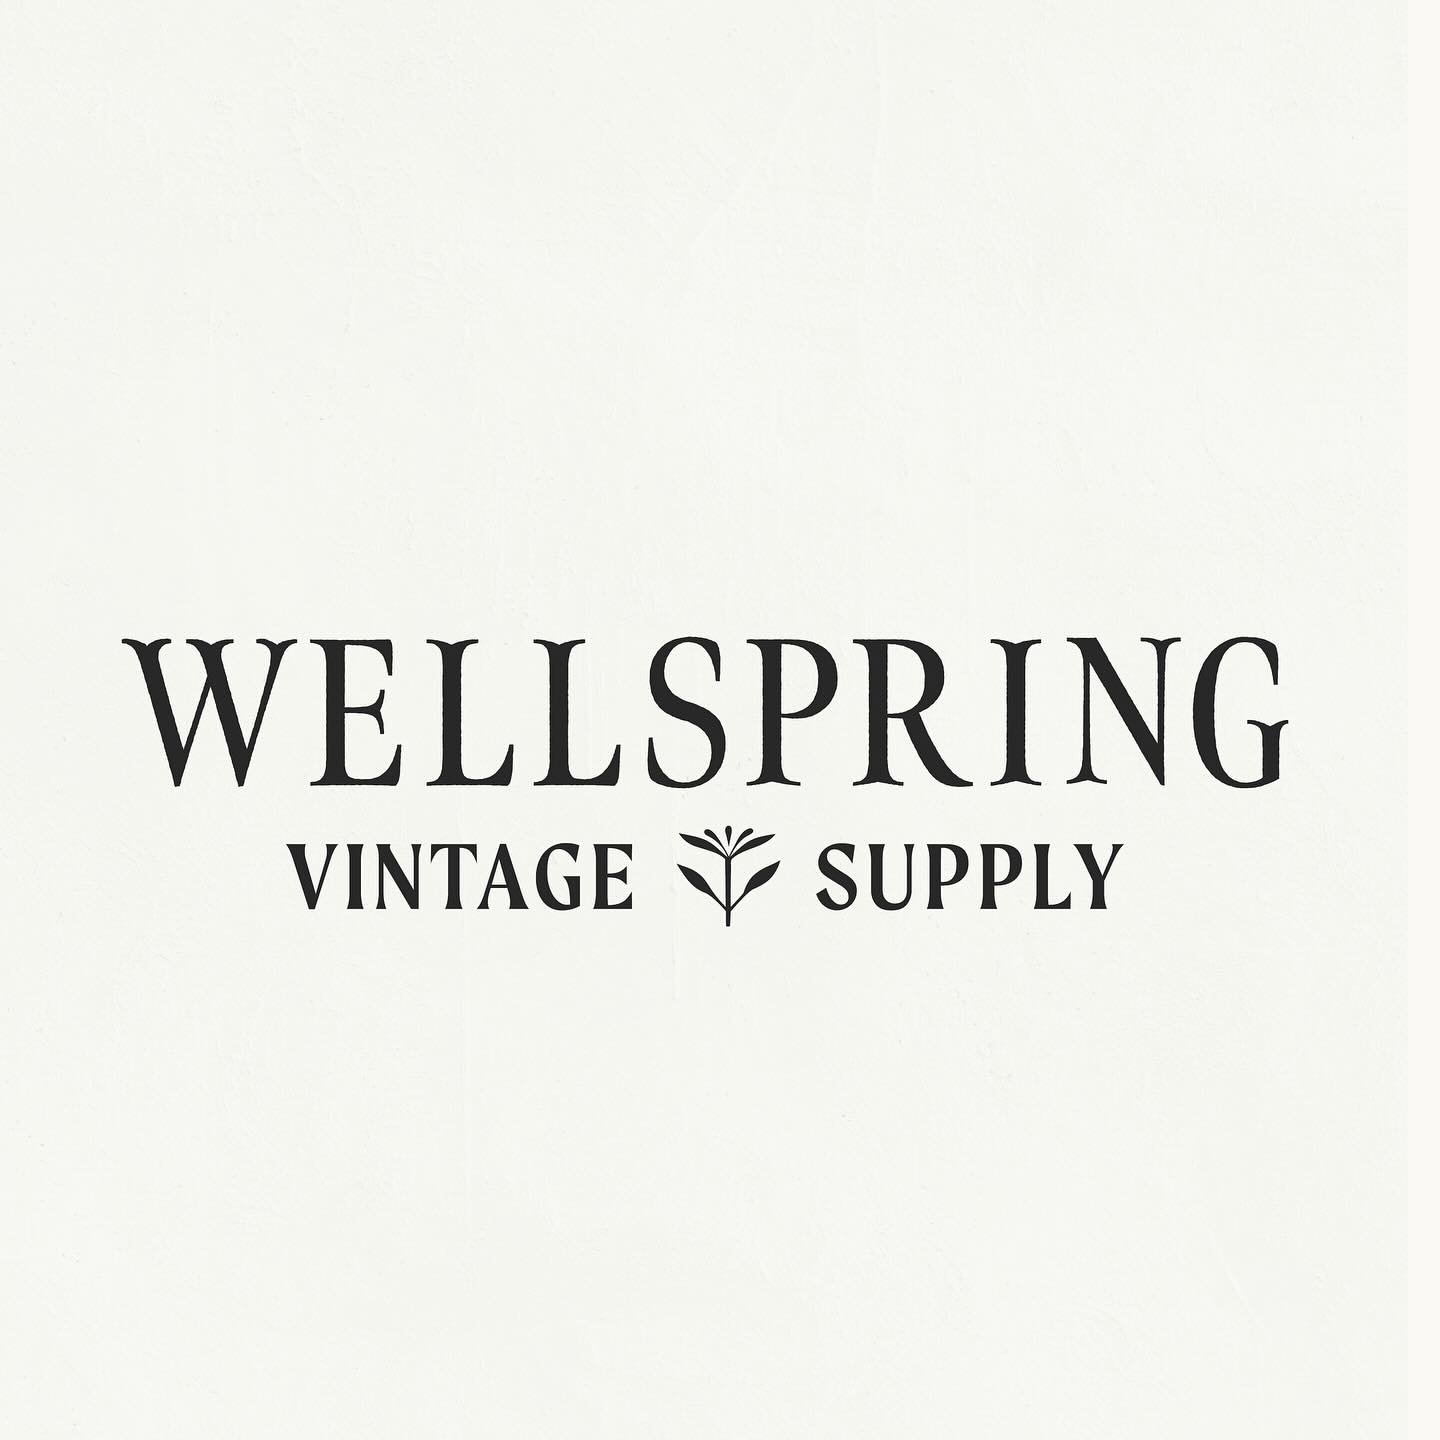 Dawn of @wellspring_vtg has been in the vintage game for a while, but recently stepped out to start doing her  work under her Wellspring brand. 

I was excited to work with her because I LOVE her eye for vintage - she has a knack for finding the most